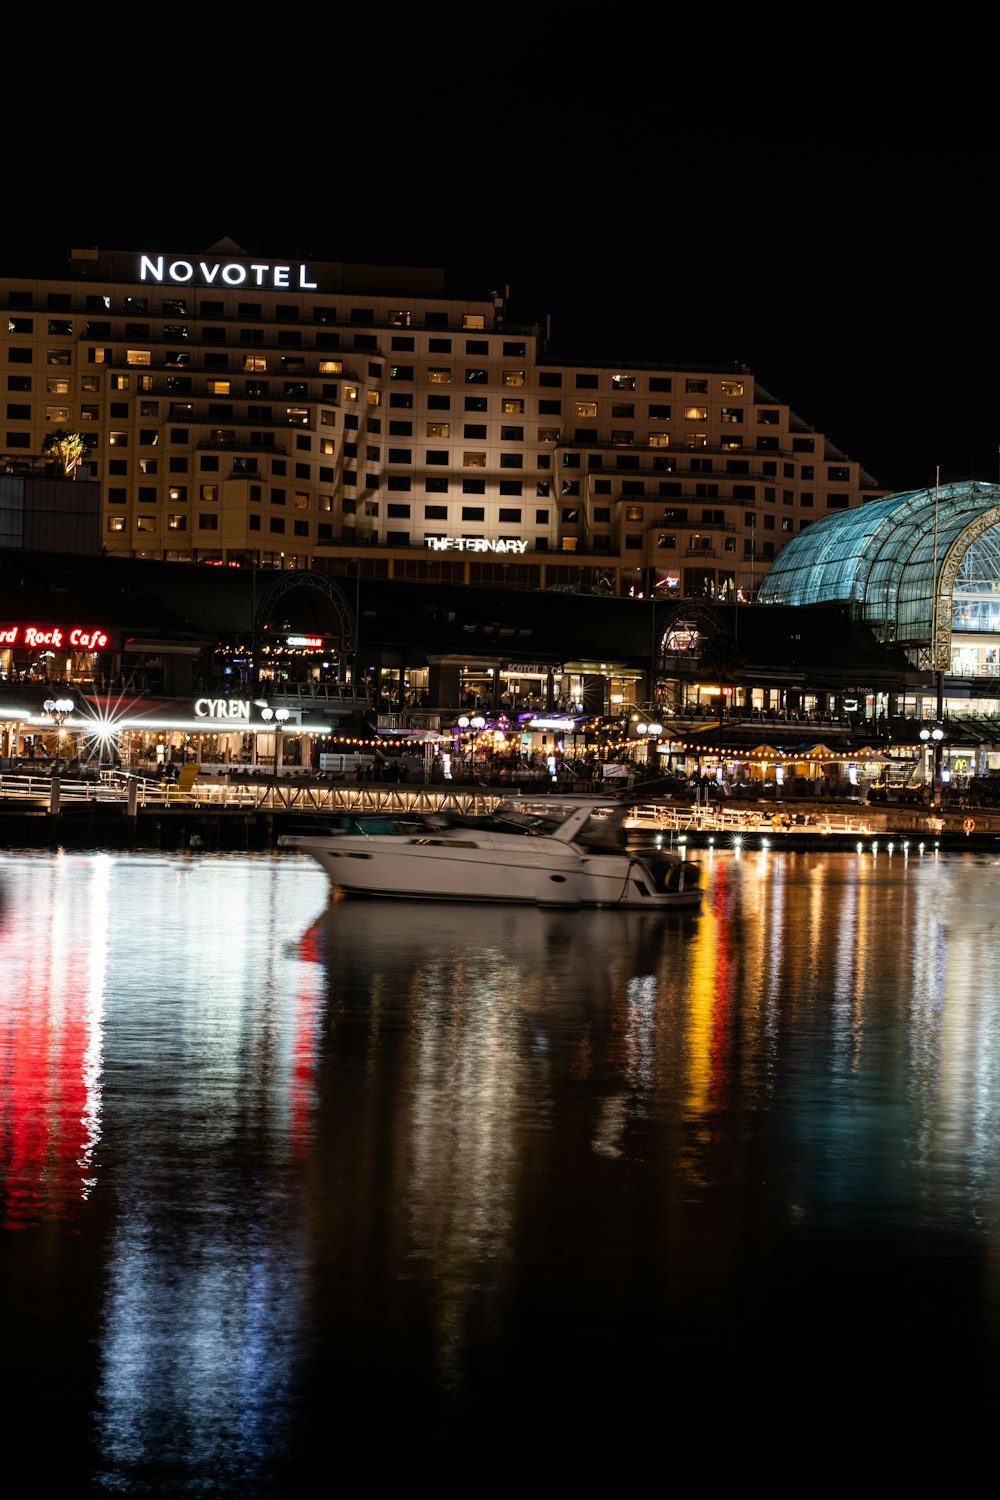 a boat is docked in a harbor at night